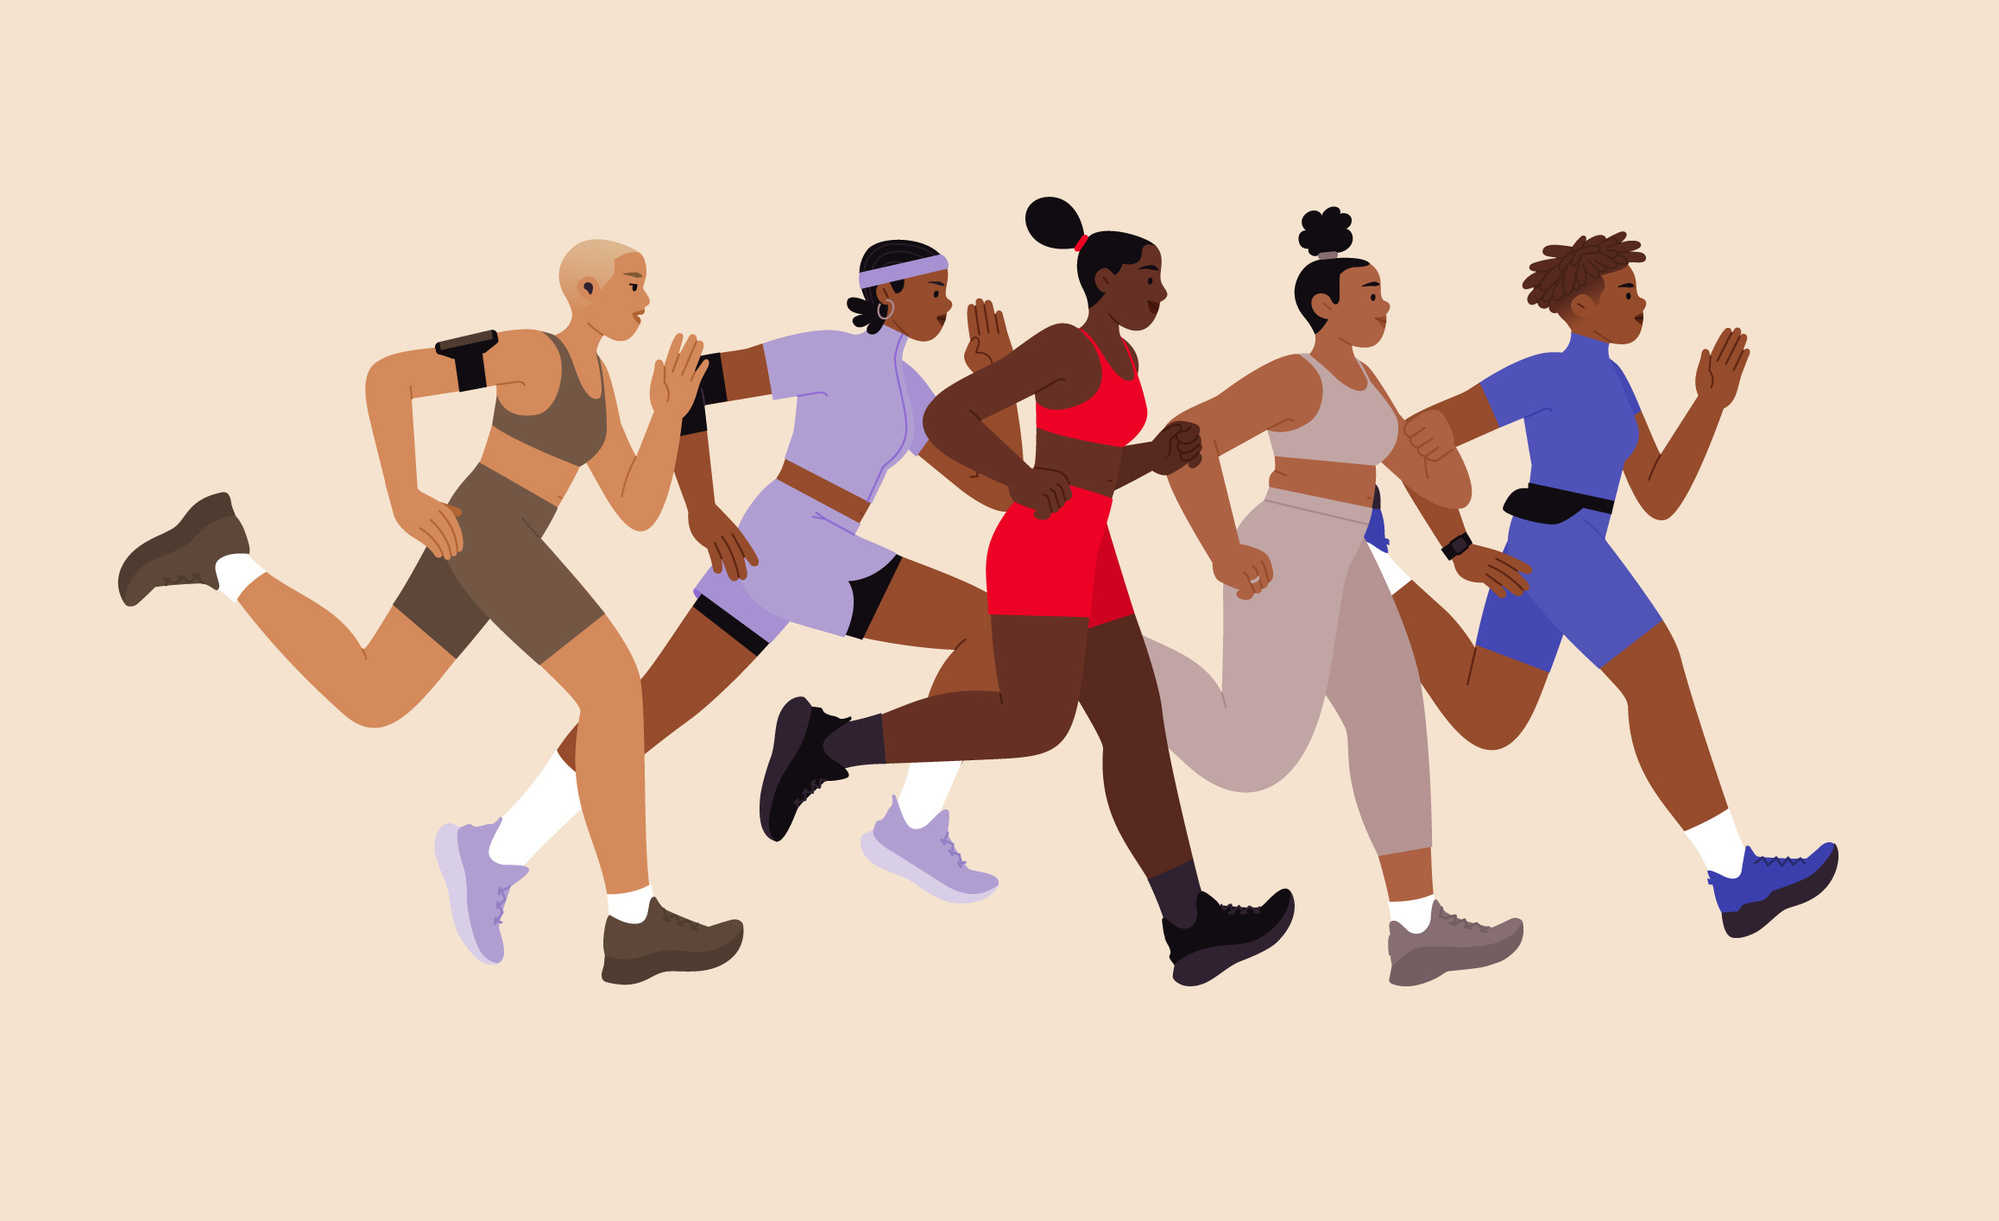 Experience the vitality of this flat design illustration with vibrant sportswear colors. A group of women runs unison, motivated to maintain physical and mental health. This illustration captures the essence of diversity.